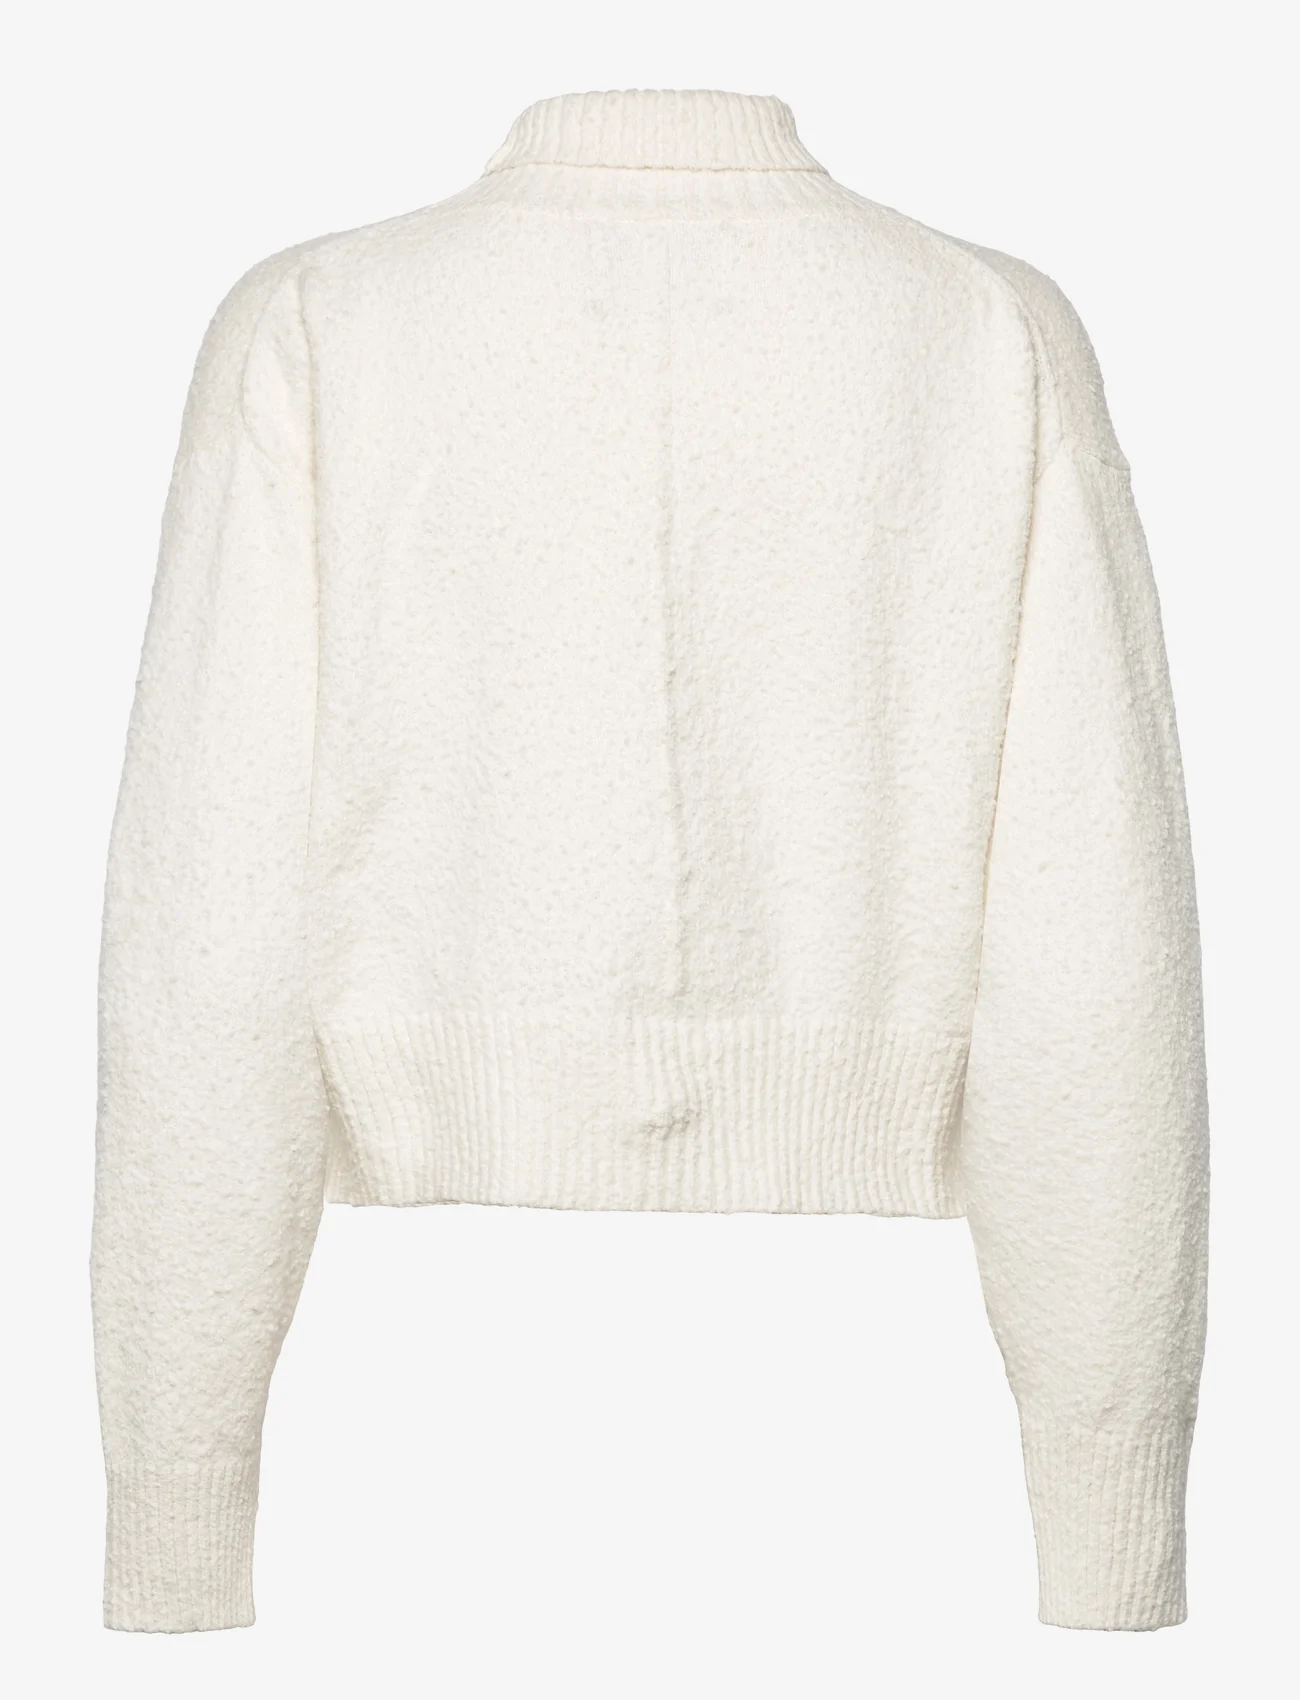 Calvin Klein Jeans - BOUCLE HIGH NECK SWEATER - gensere - ivory - 1